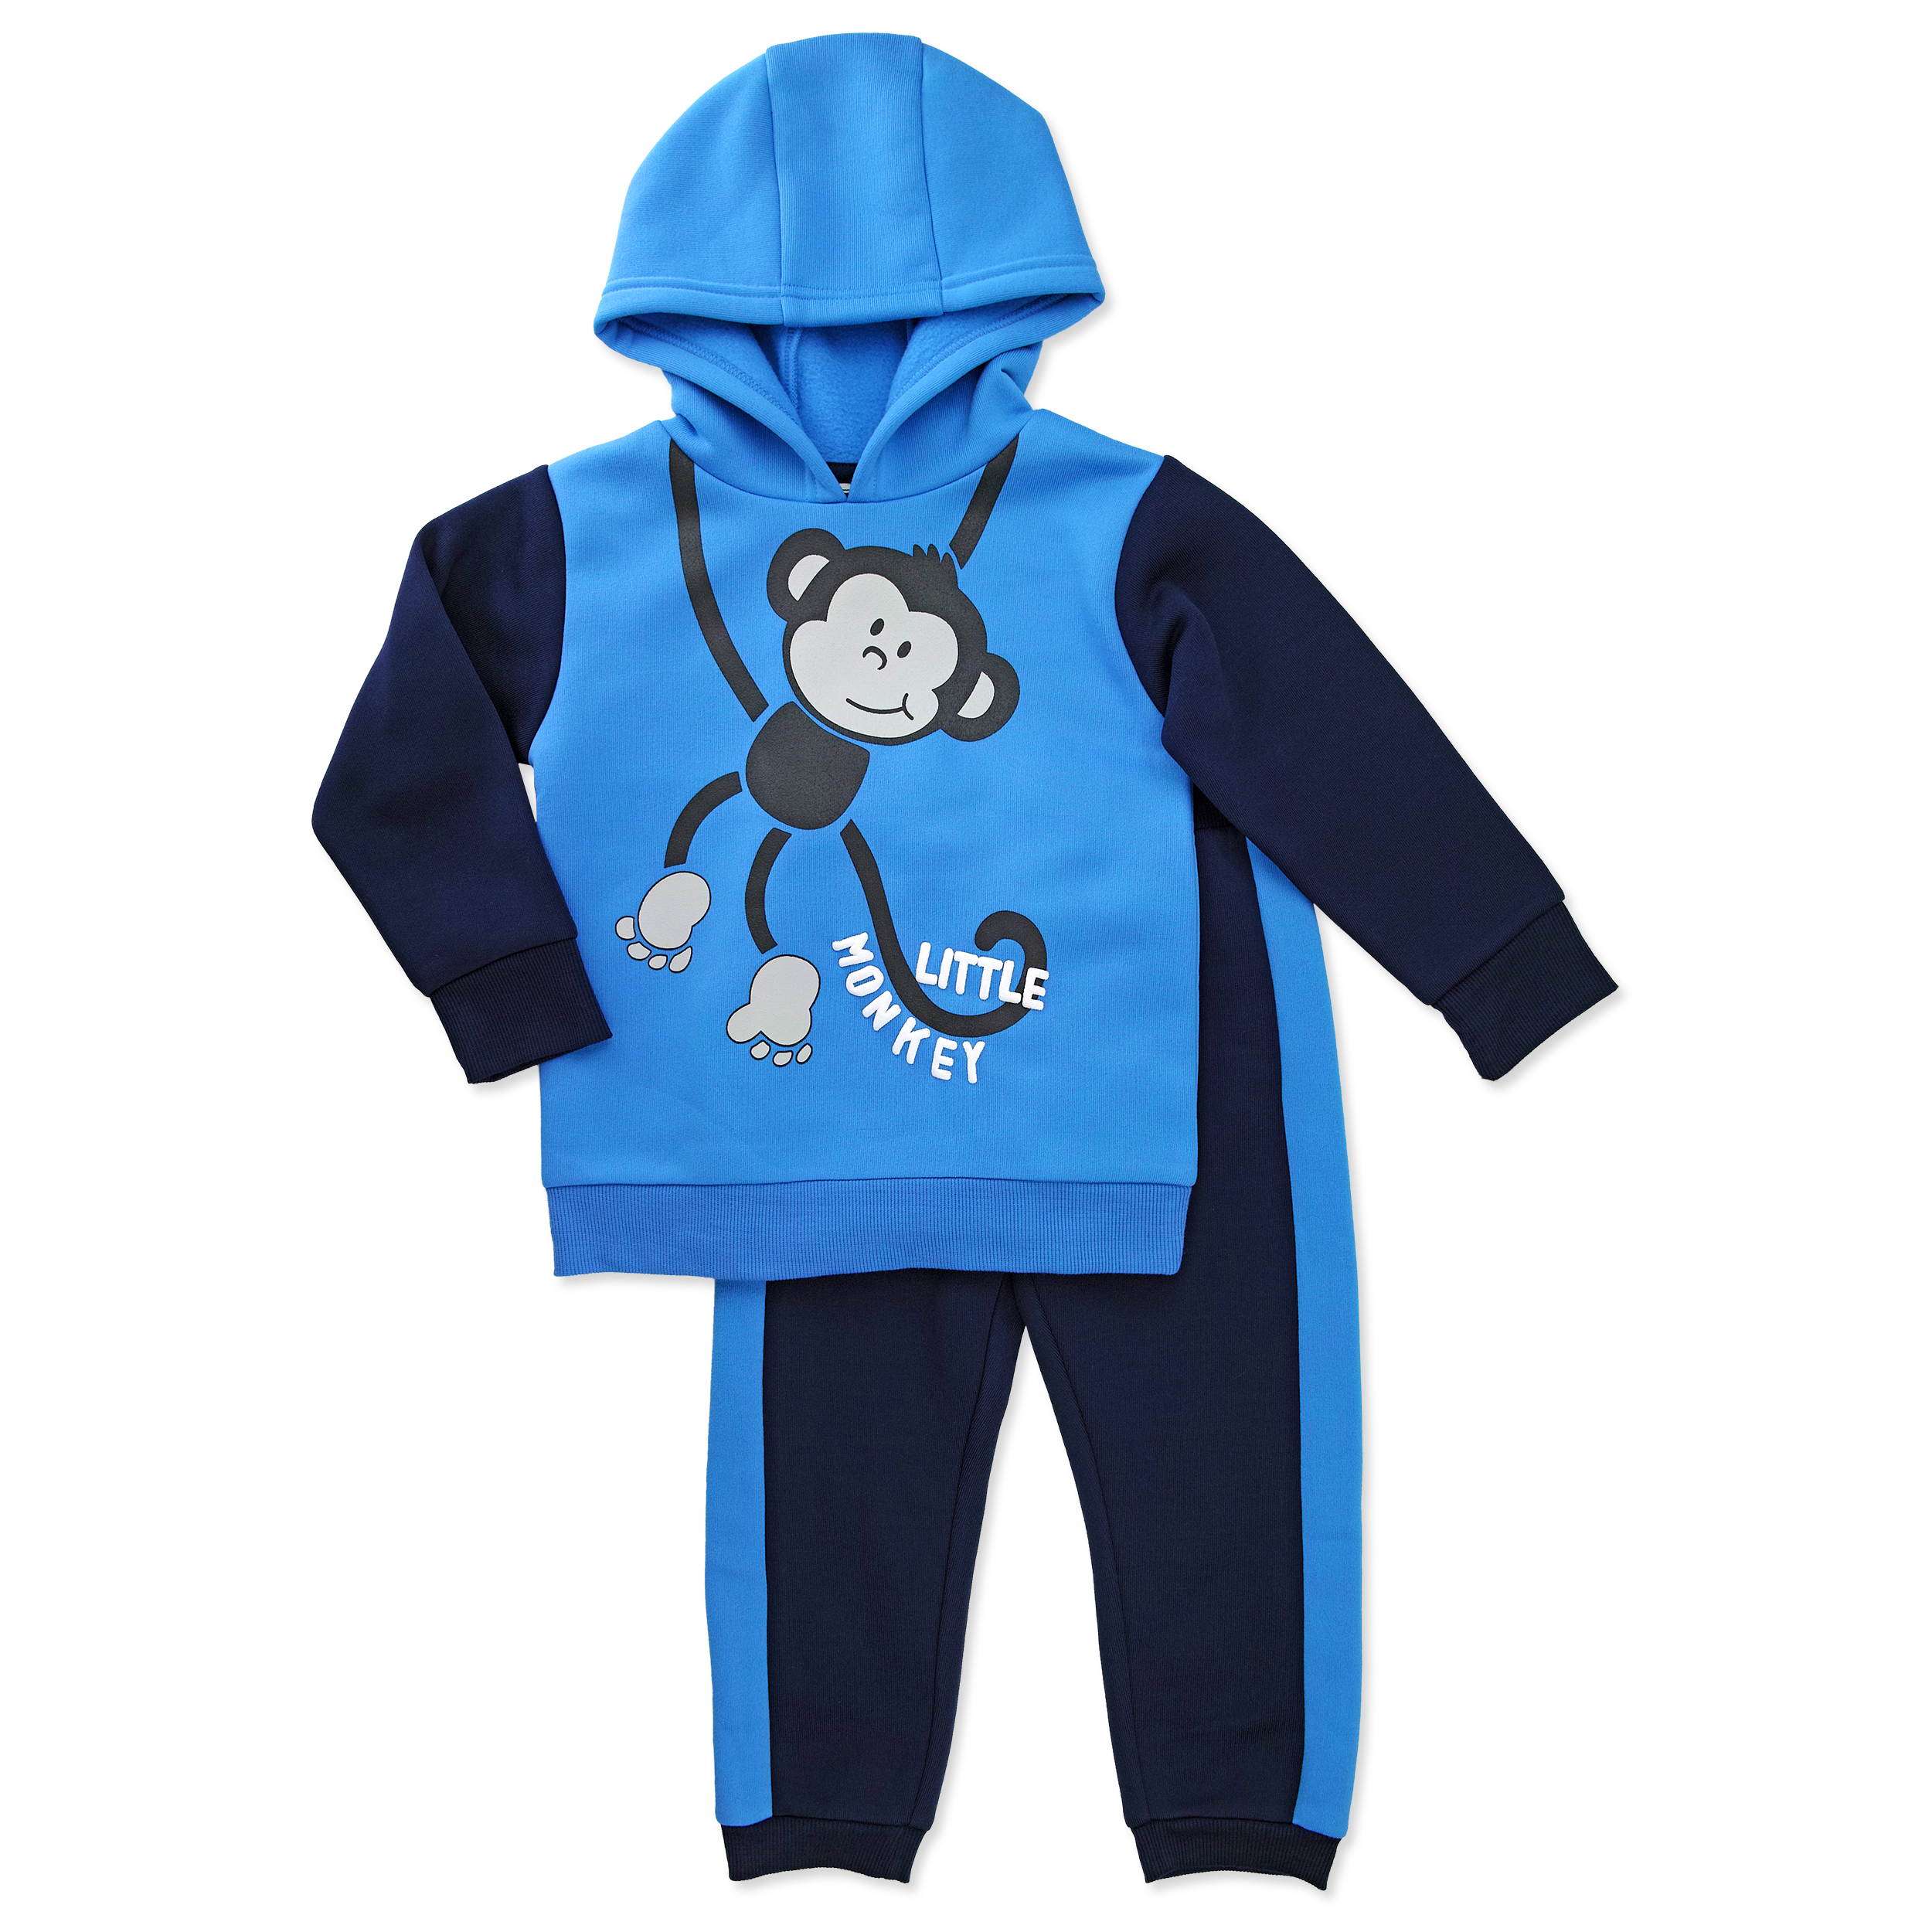 Young Hearts Infant & Toddler Boy's Hoodie & Sweatpants - Striped